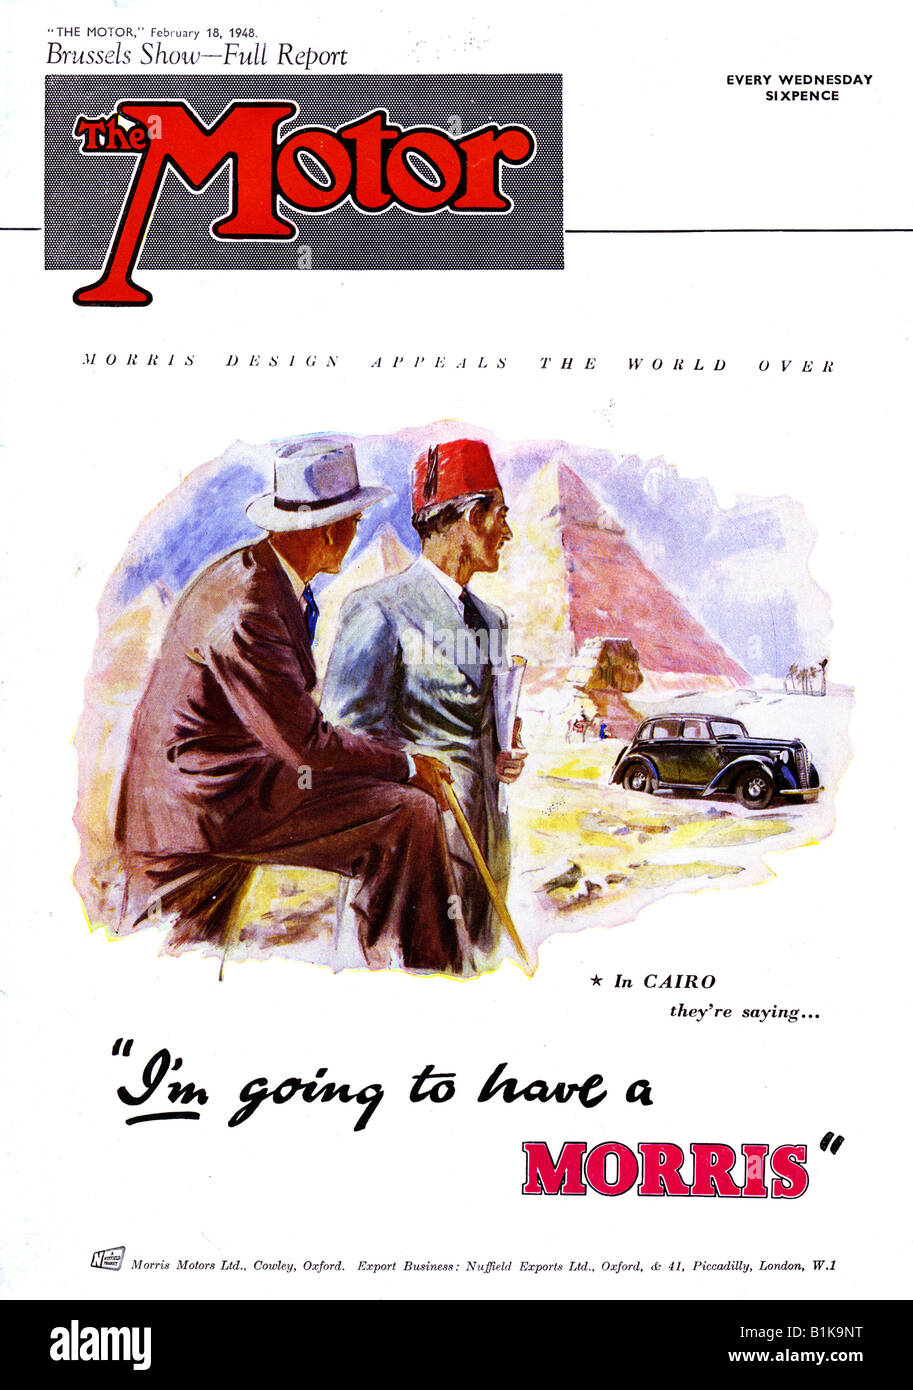 The Motor Magazine 18 February 1948 front cover featuring Morris Motors Ltd FOR EDITORIAL USE ONLY Stock Photo